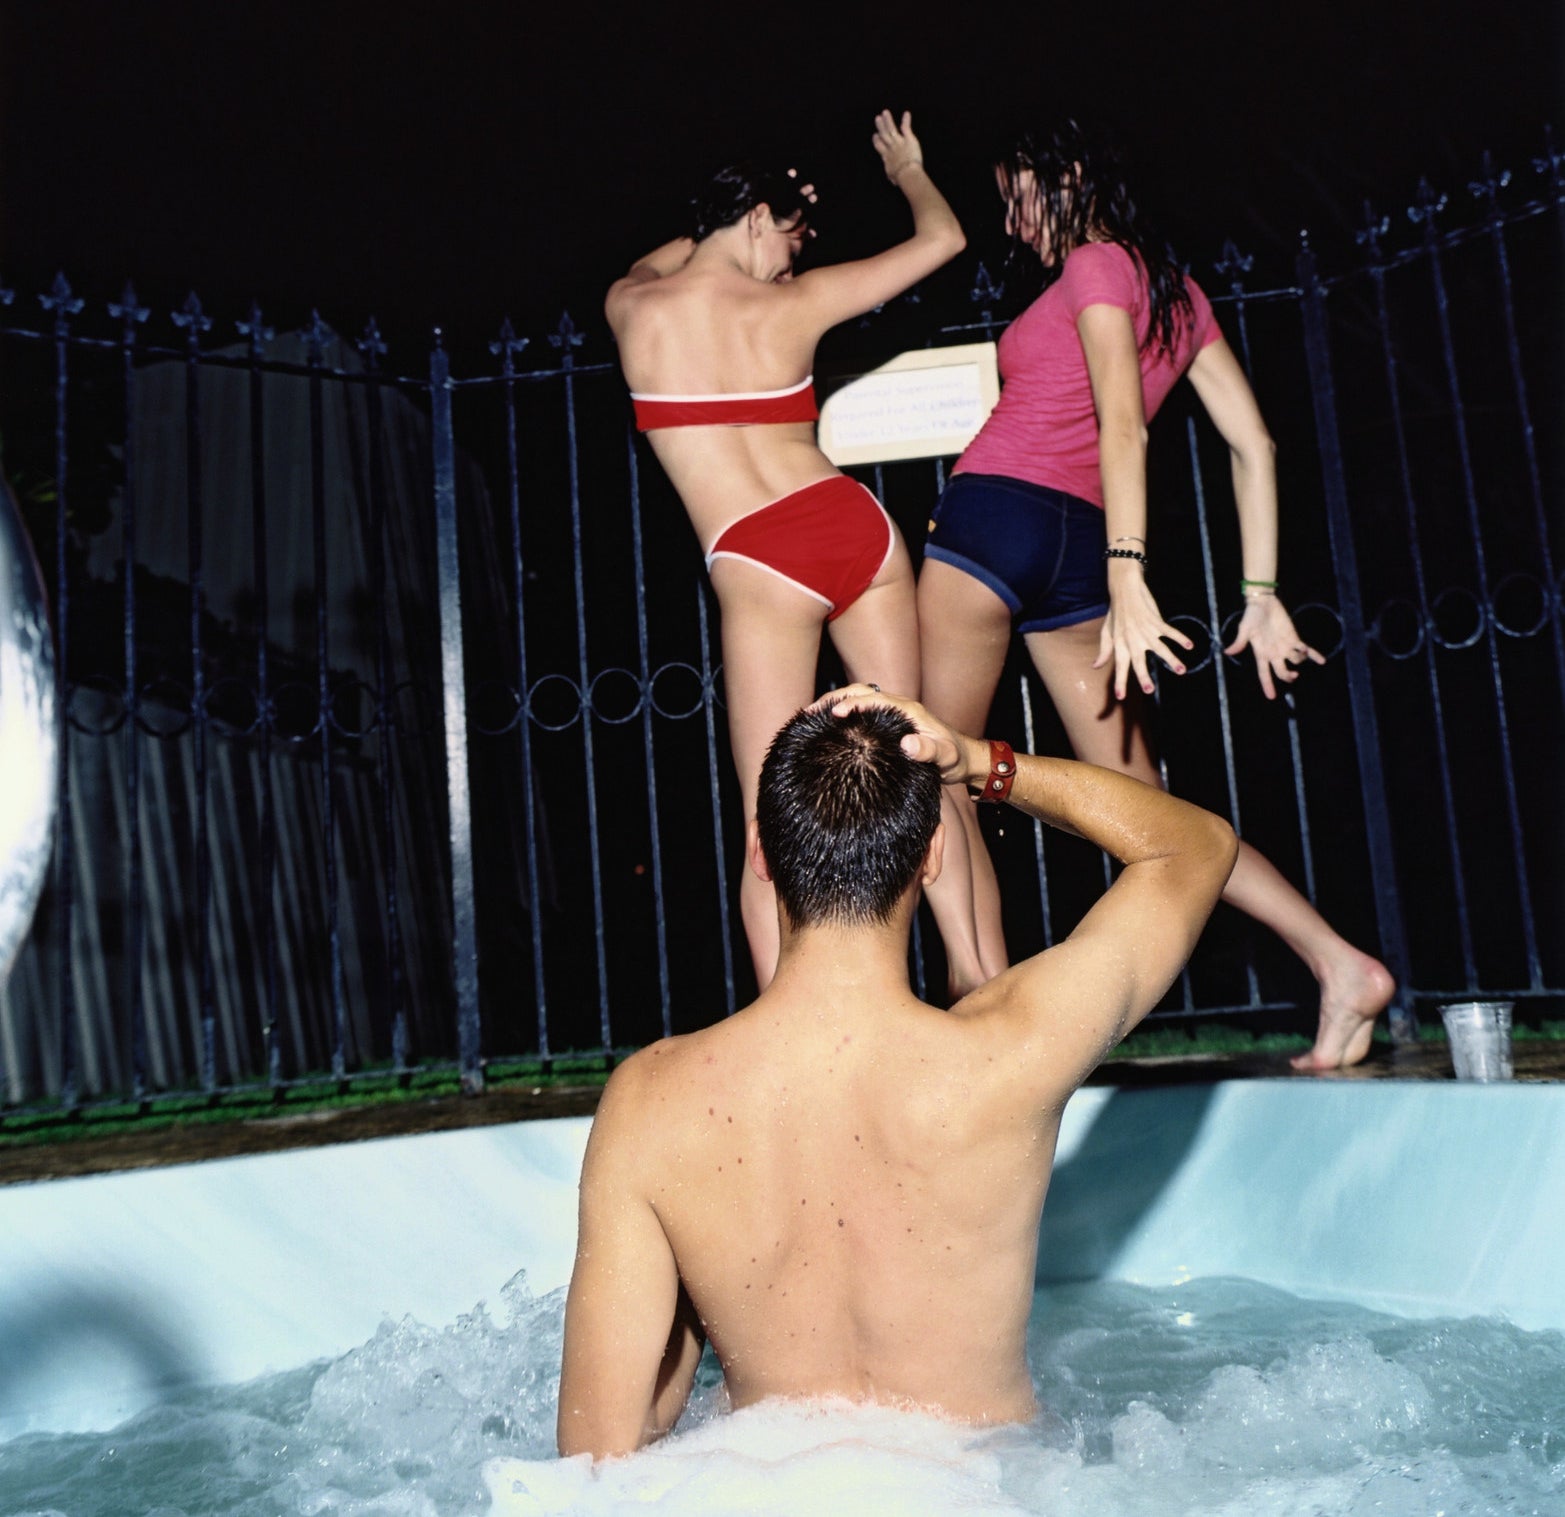 Three people partying in a hot tub